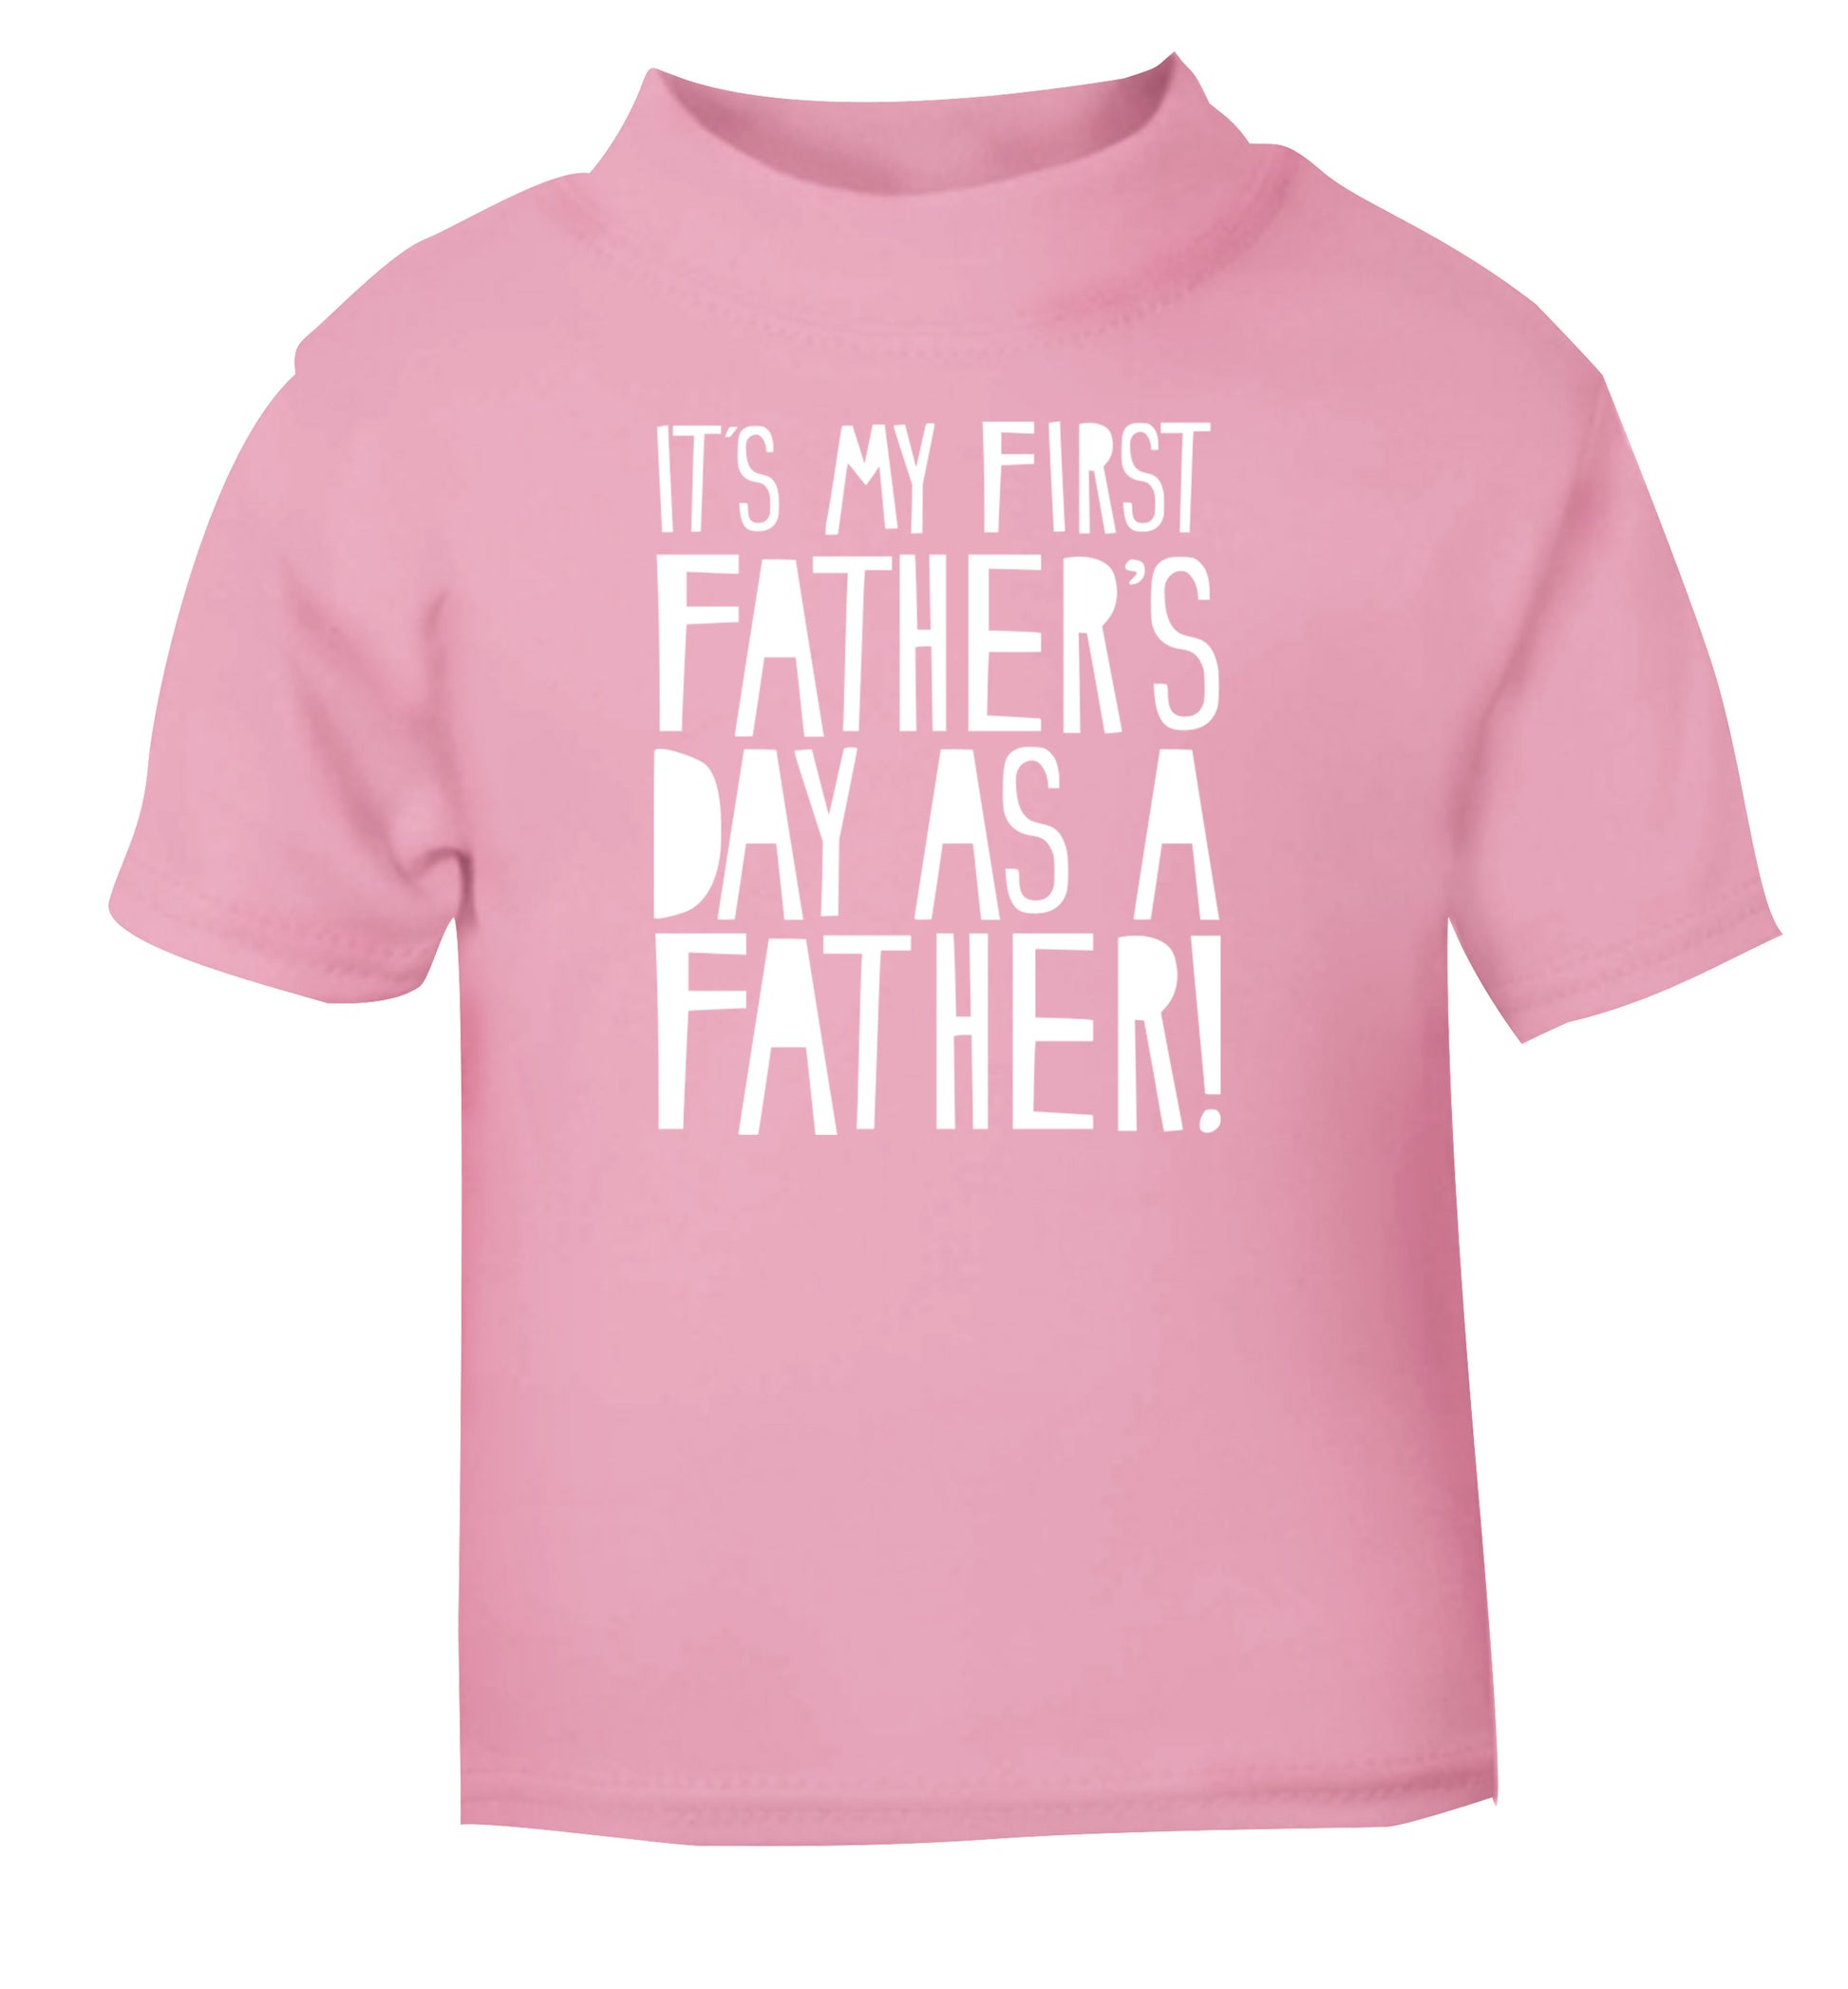 It's my first Father's Day as a father! light pink Baby Toddler Tshirt 2 Years